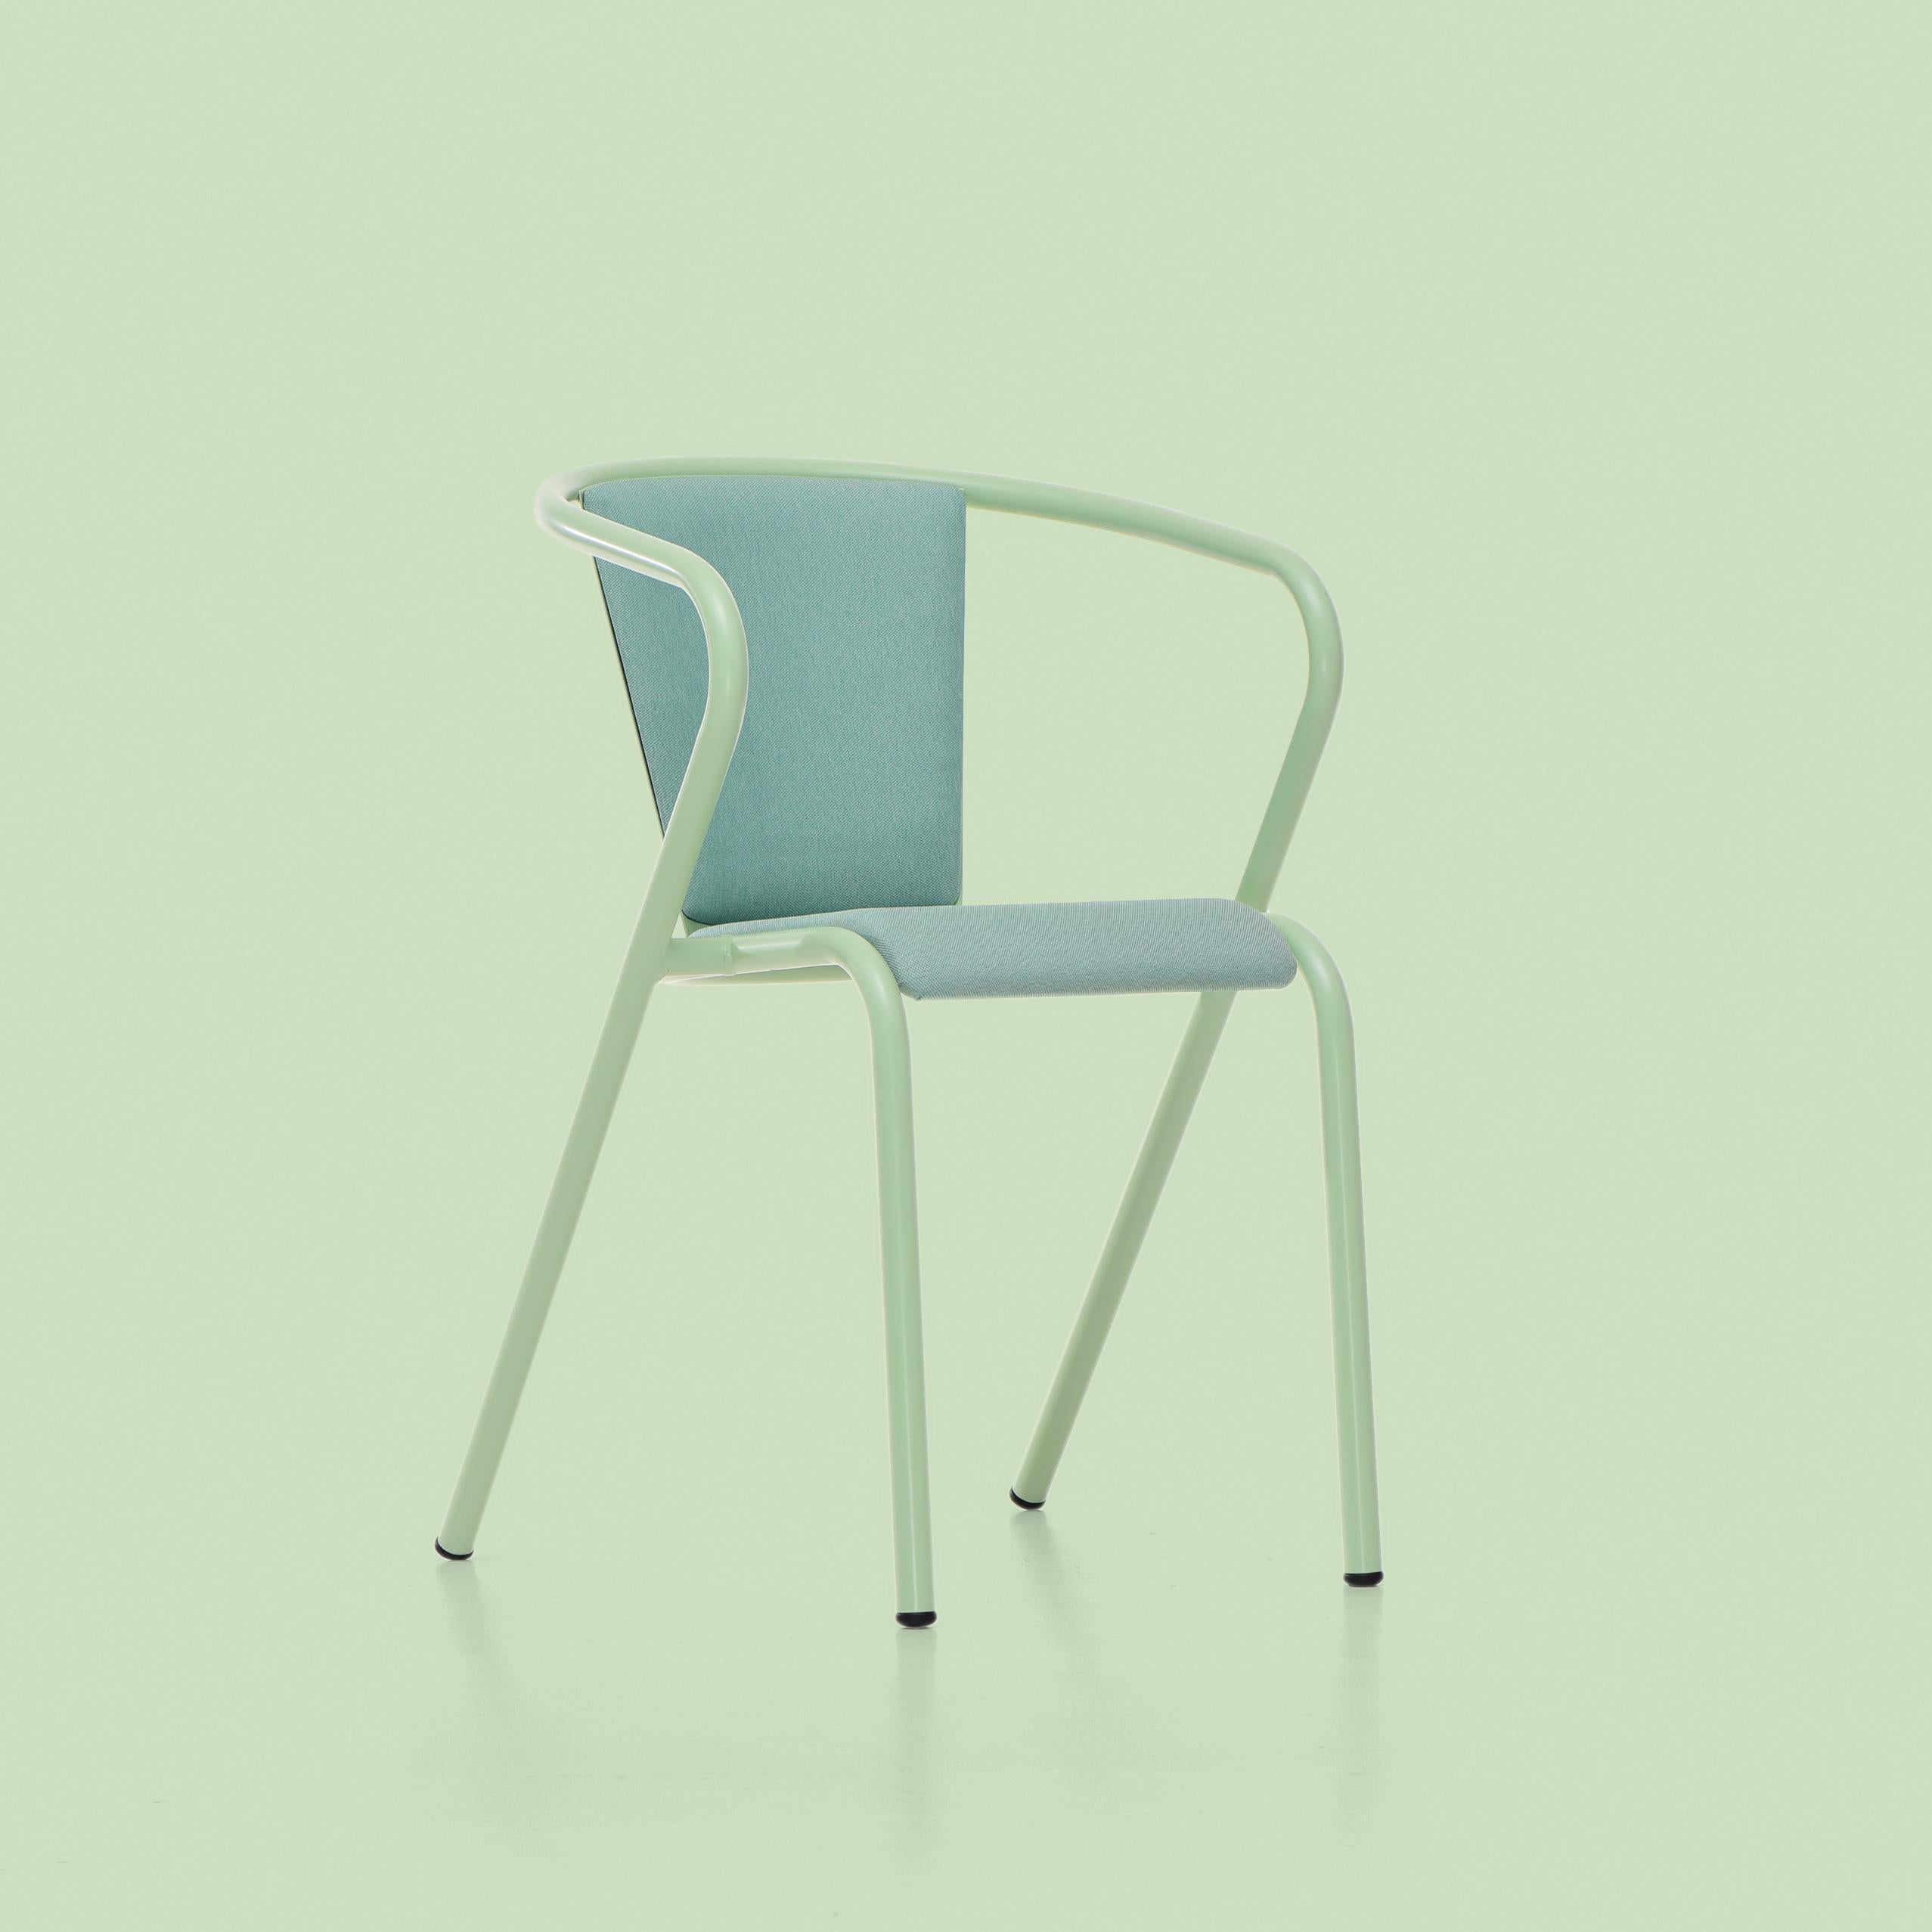 BICAchair Modern Steel Armchair Pastel Green, Upholstery in Eco-Fabric In New Condition For Sale In Agualva-Cacém, PT